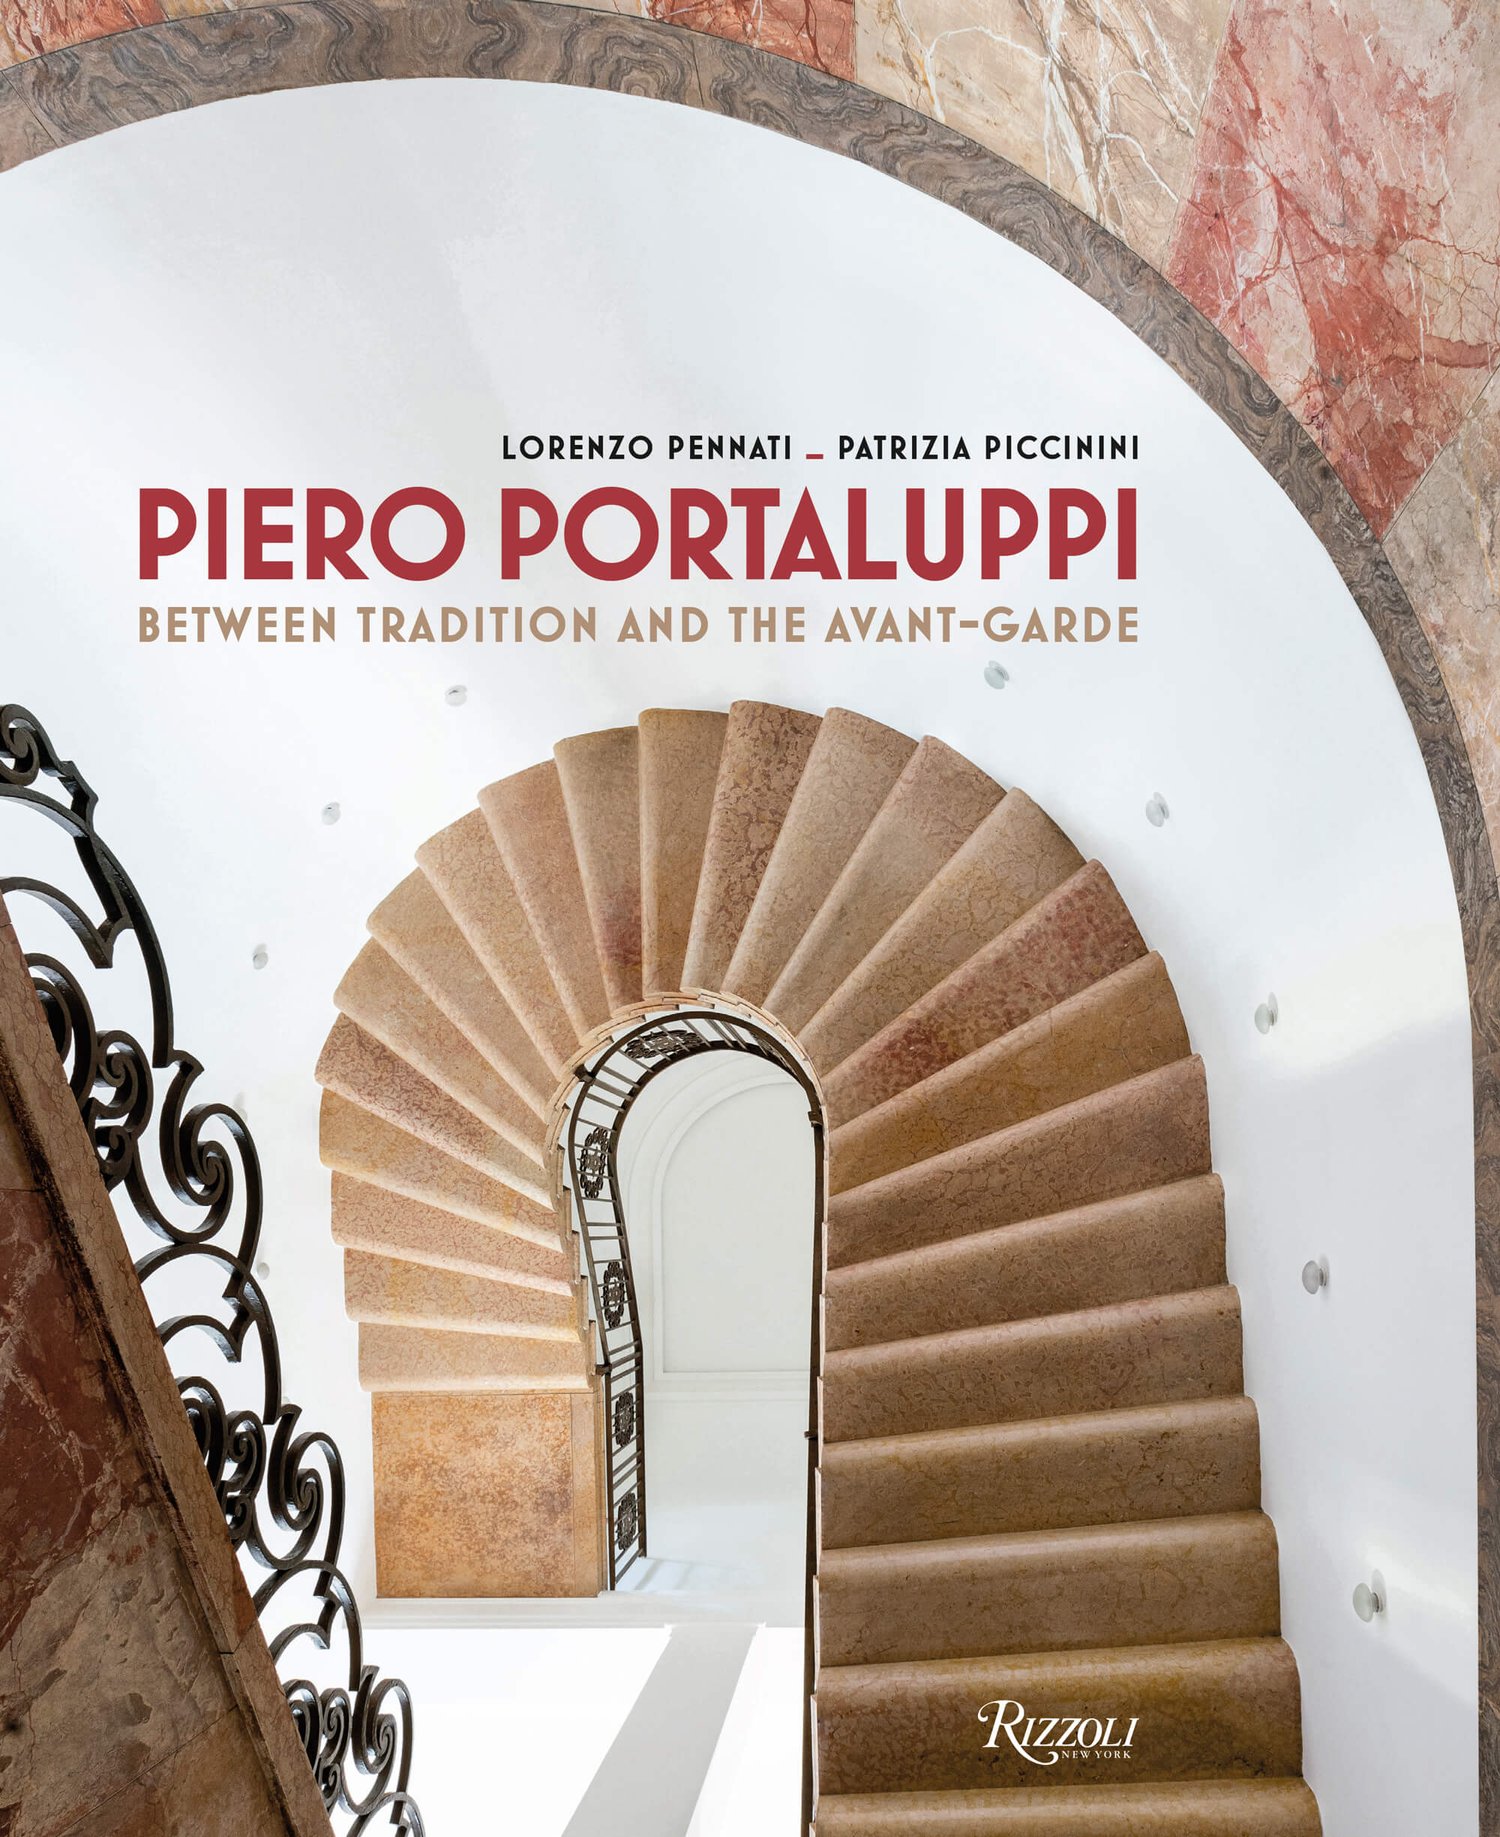 Book cover with view from above of winding staircase.